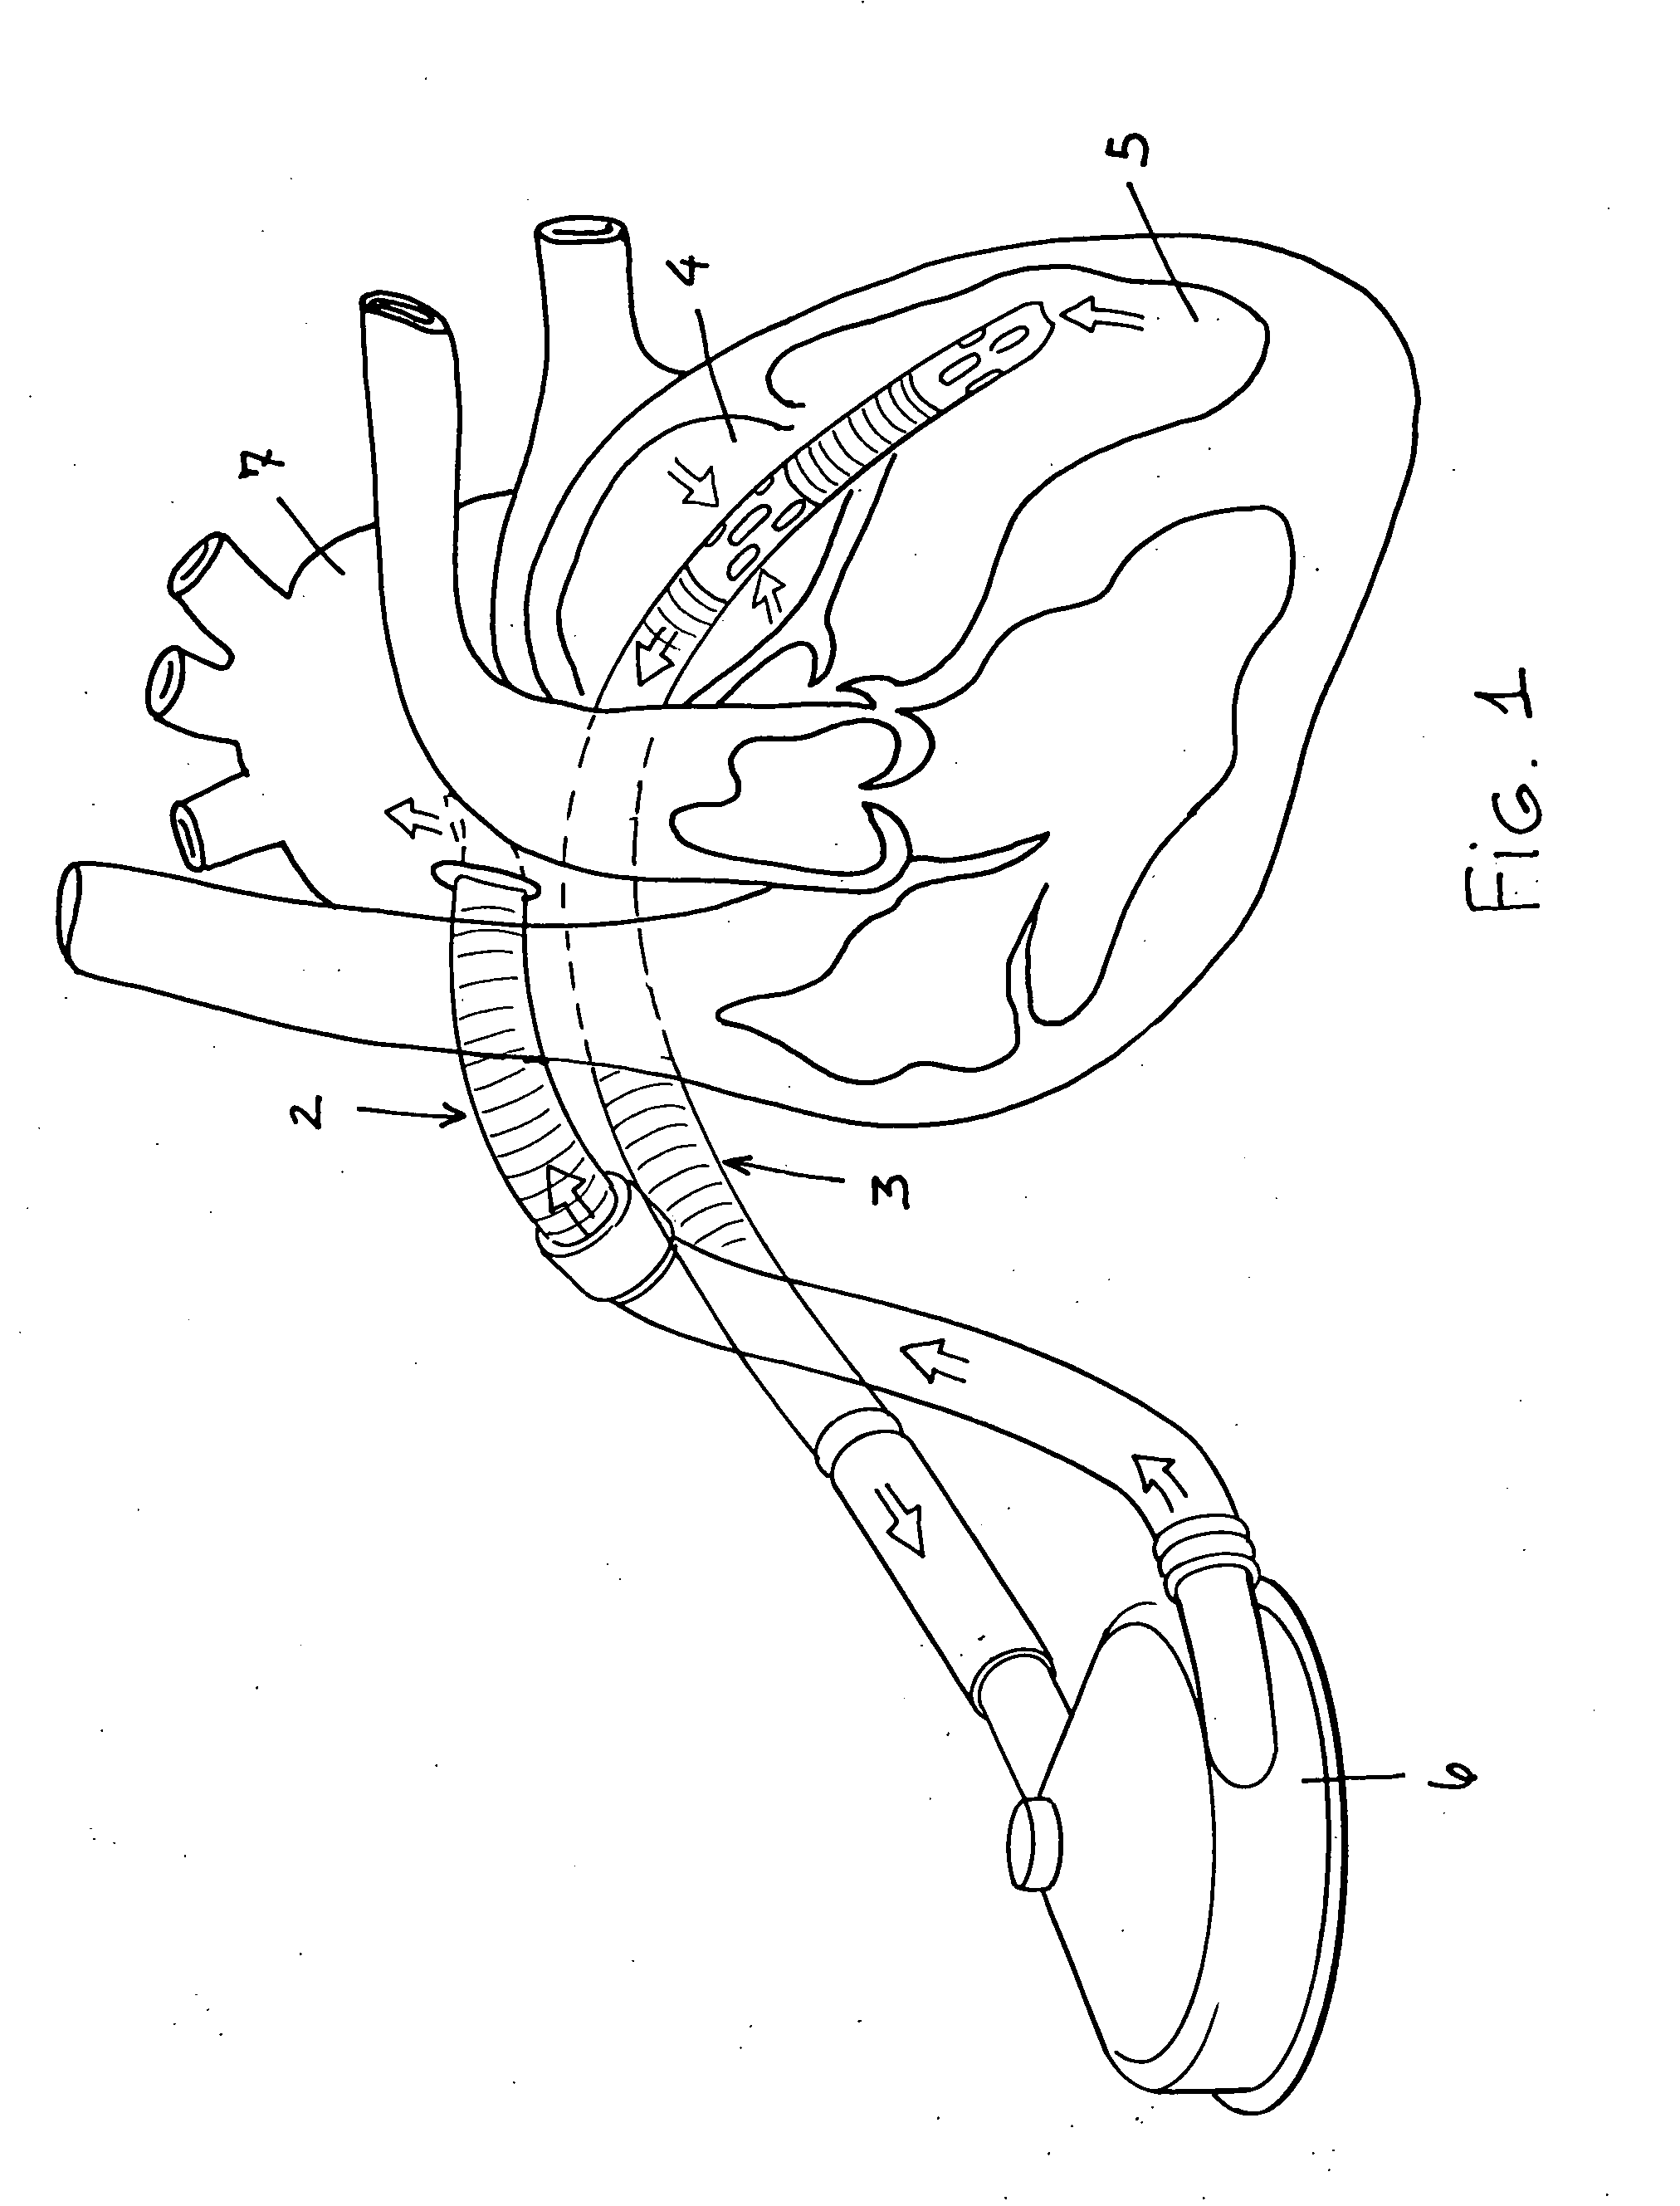 Apparatus for performing myocardial revascularization in a beating heart and left ventricular assistance condition